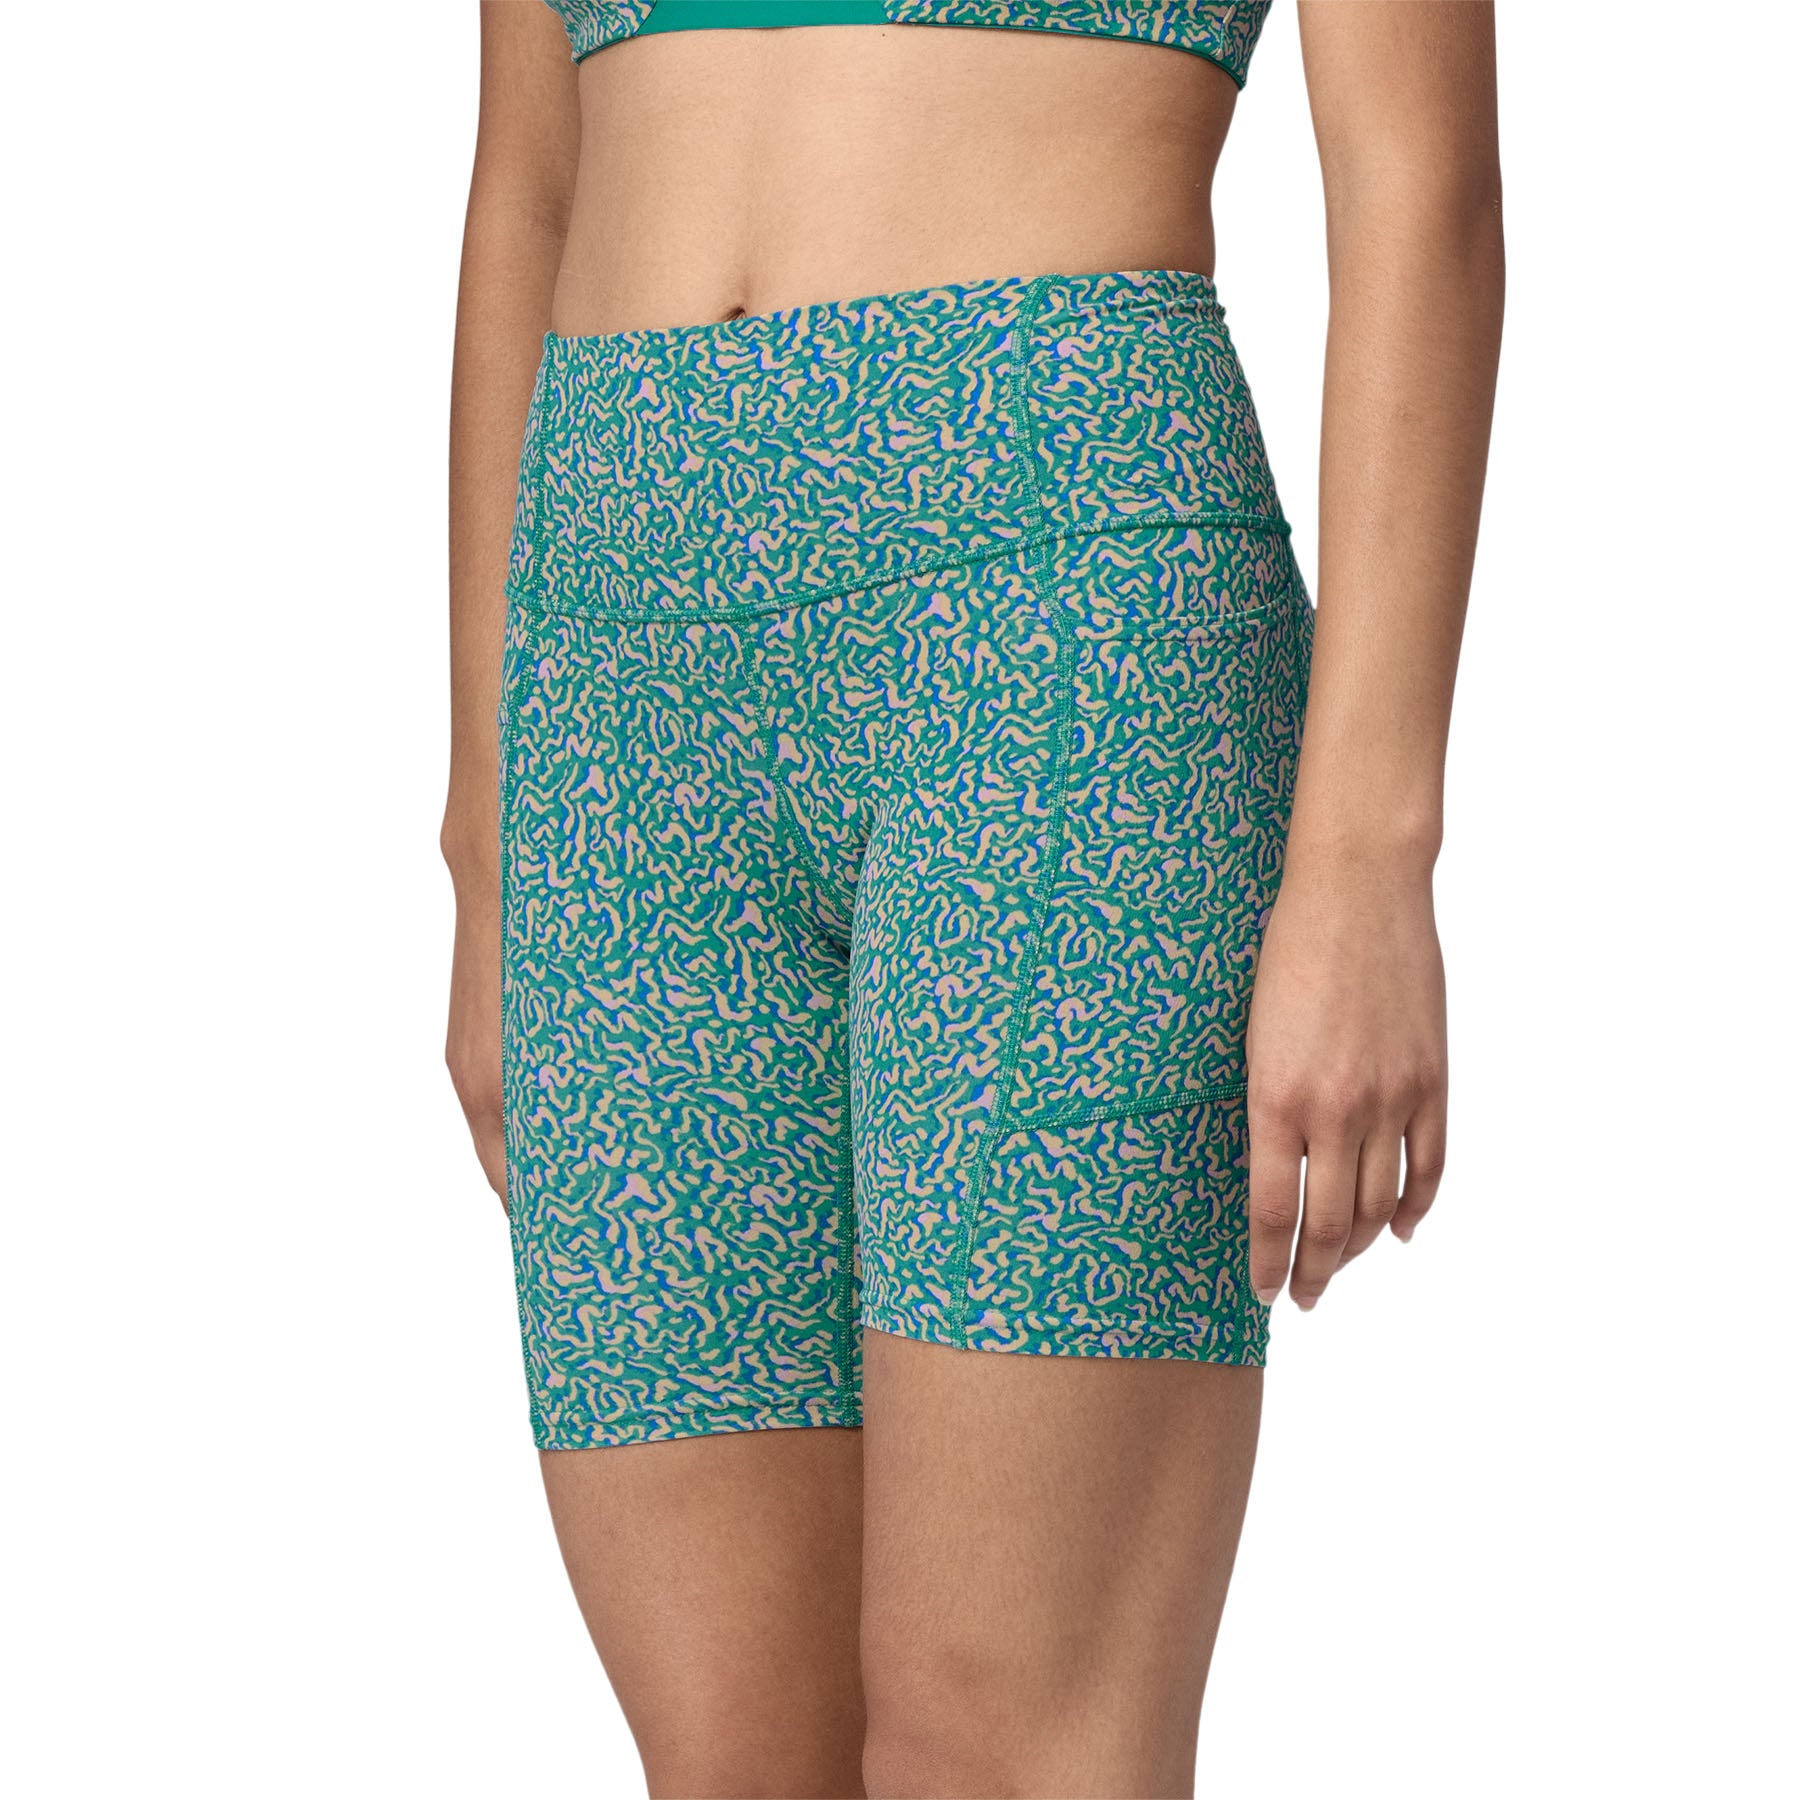 W's Maipo Shorts - 8 in.